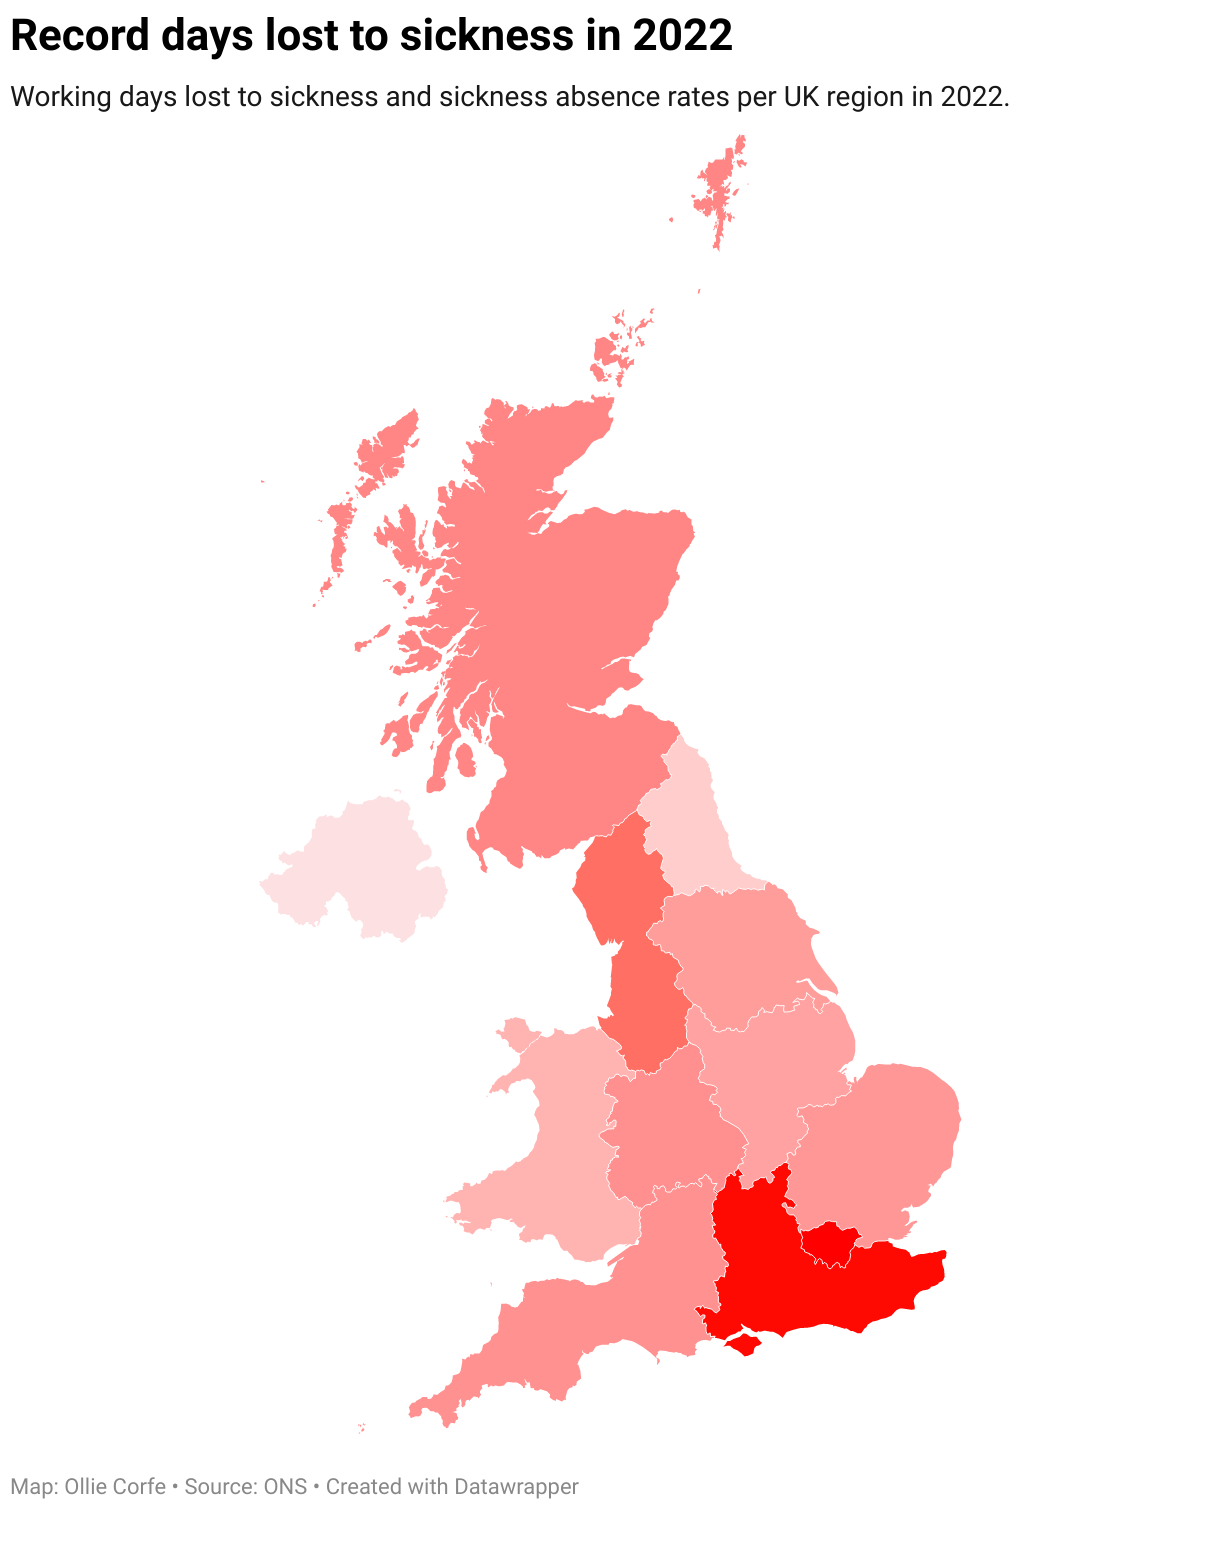 UK map of sickness rates and working days lost to sickness last year.